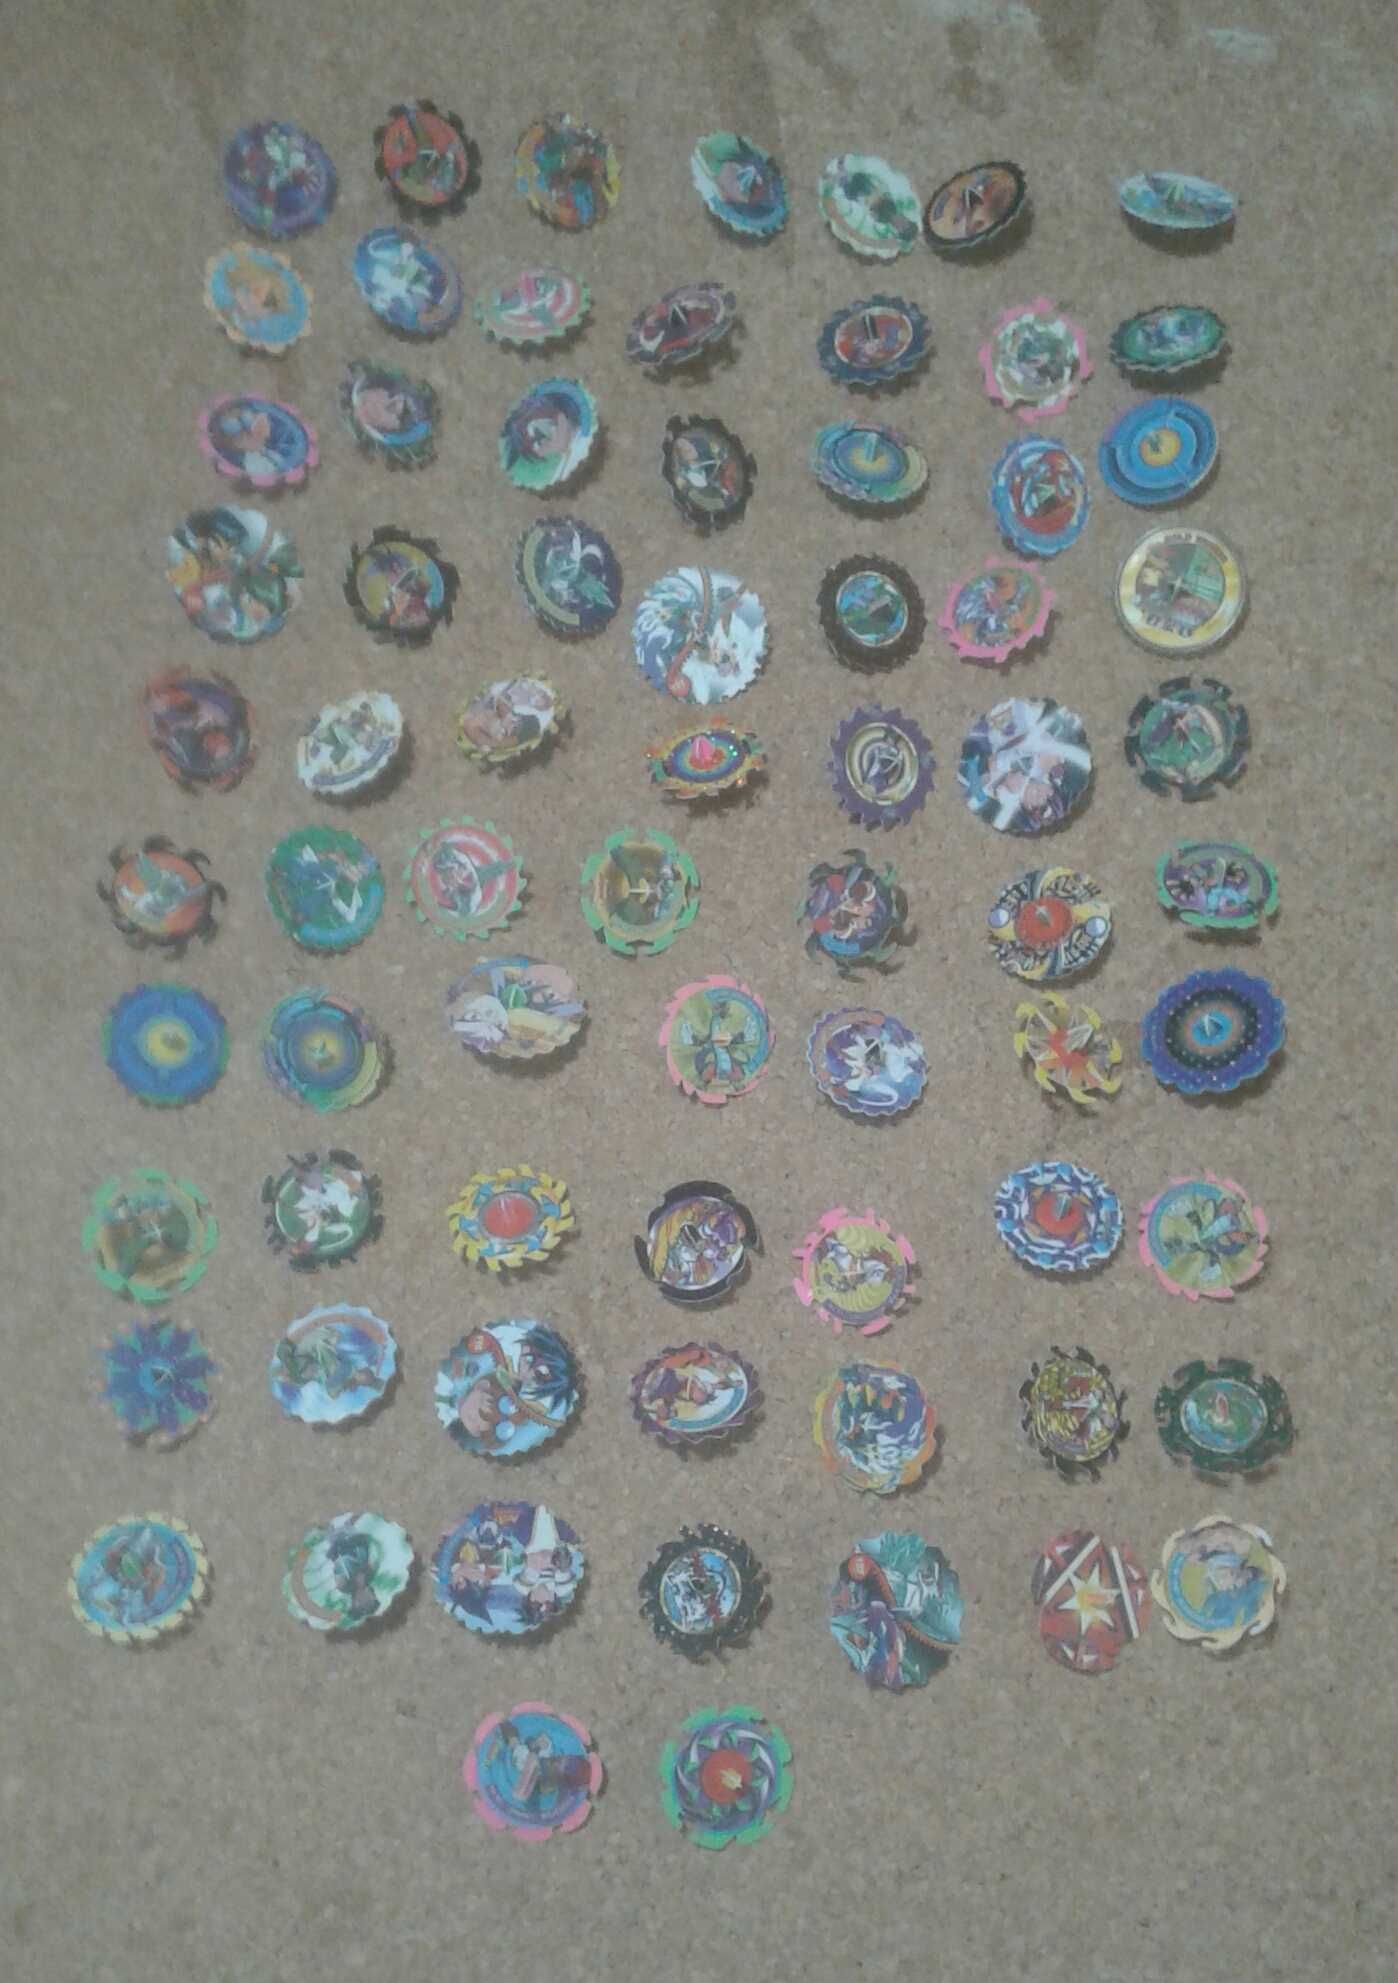 Tazos - Spinners